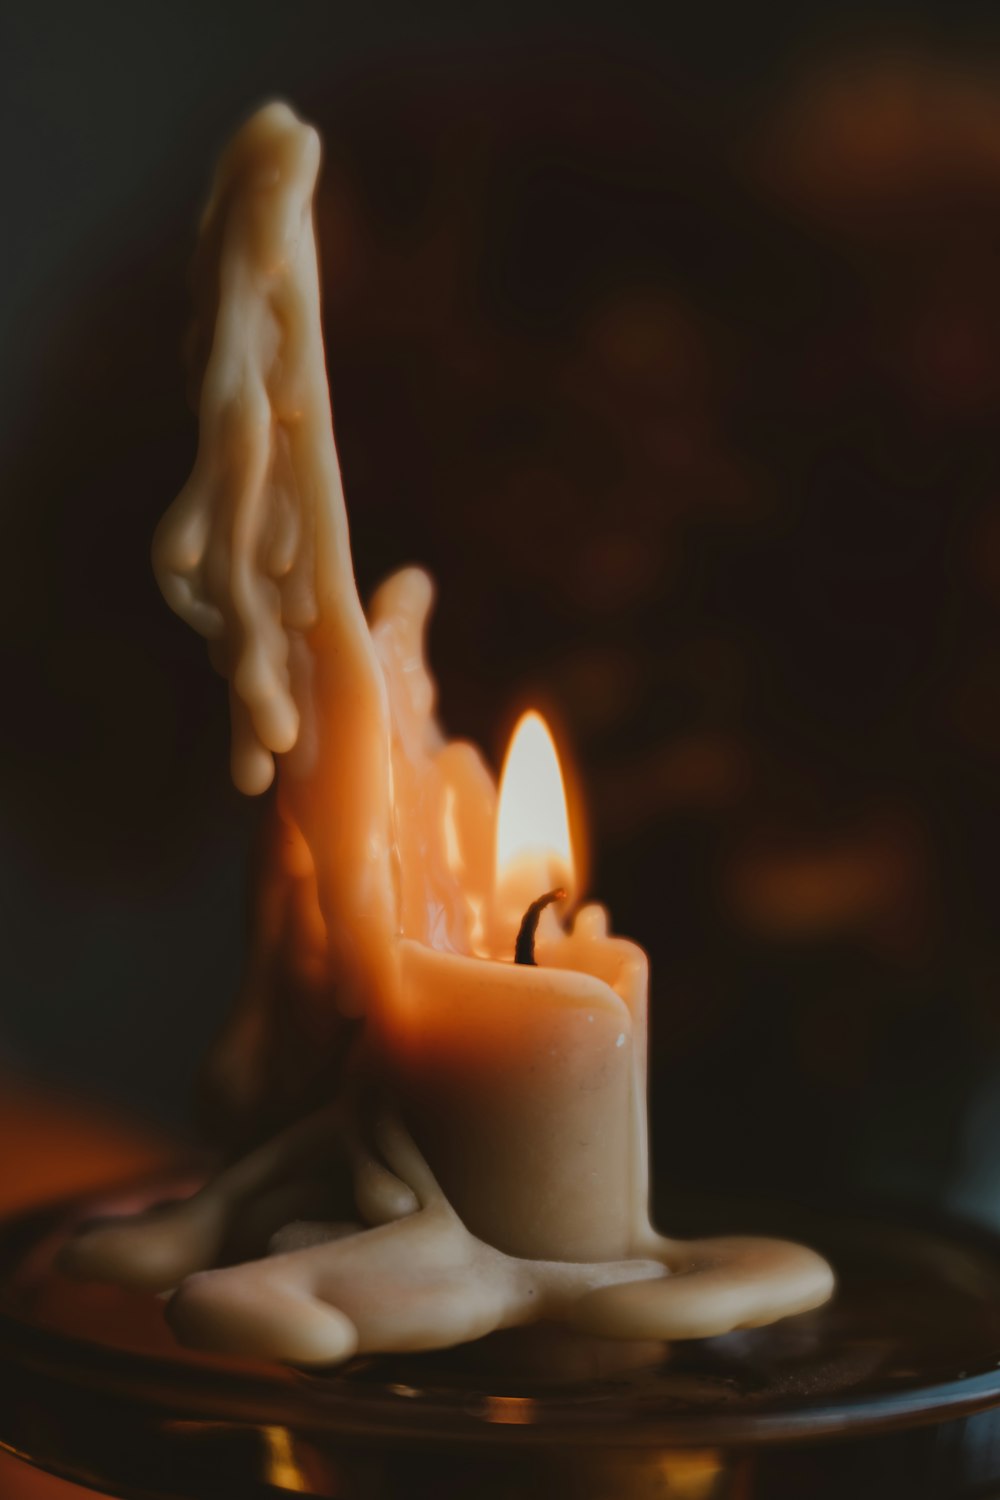 A close-up of a flame photo – Free Candle Image on Unsplash